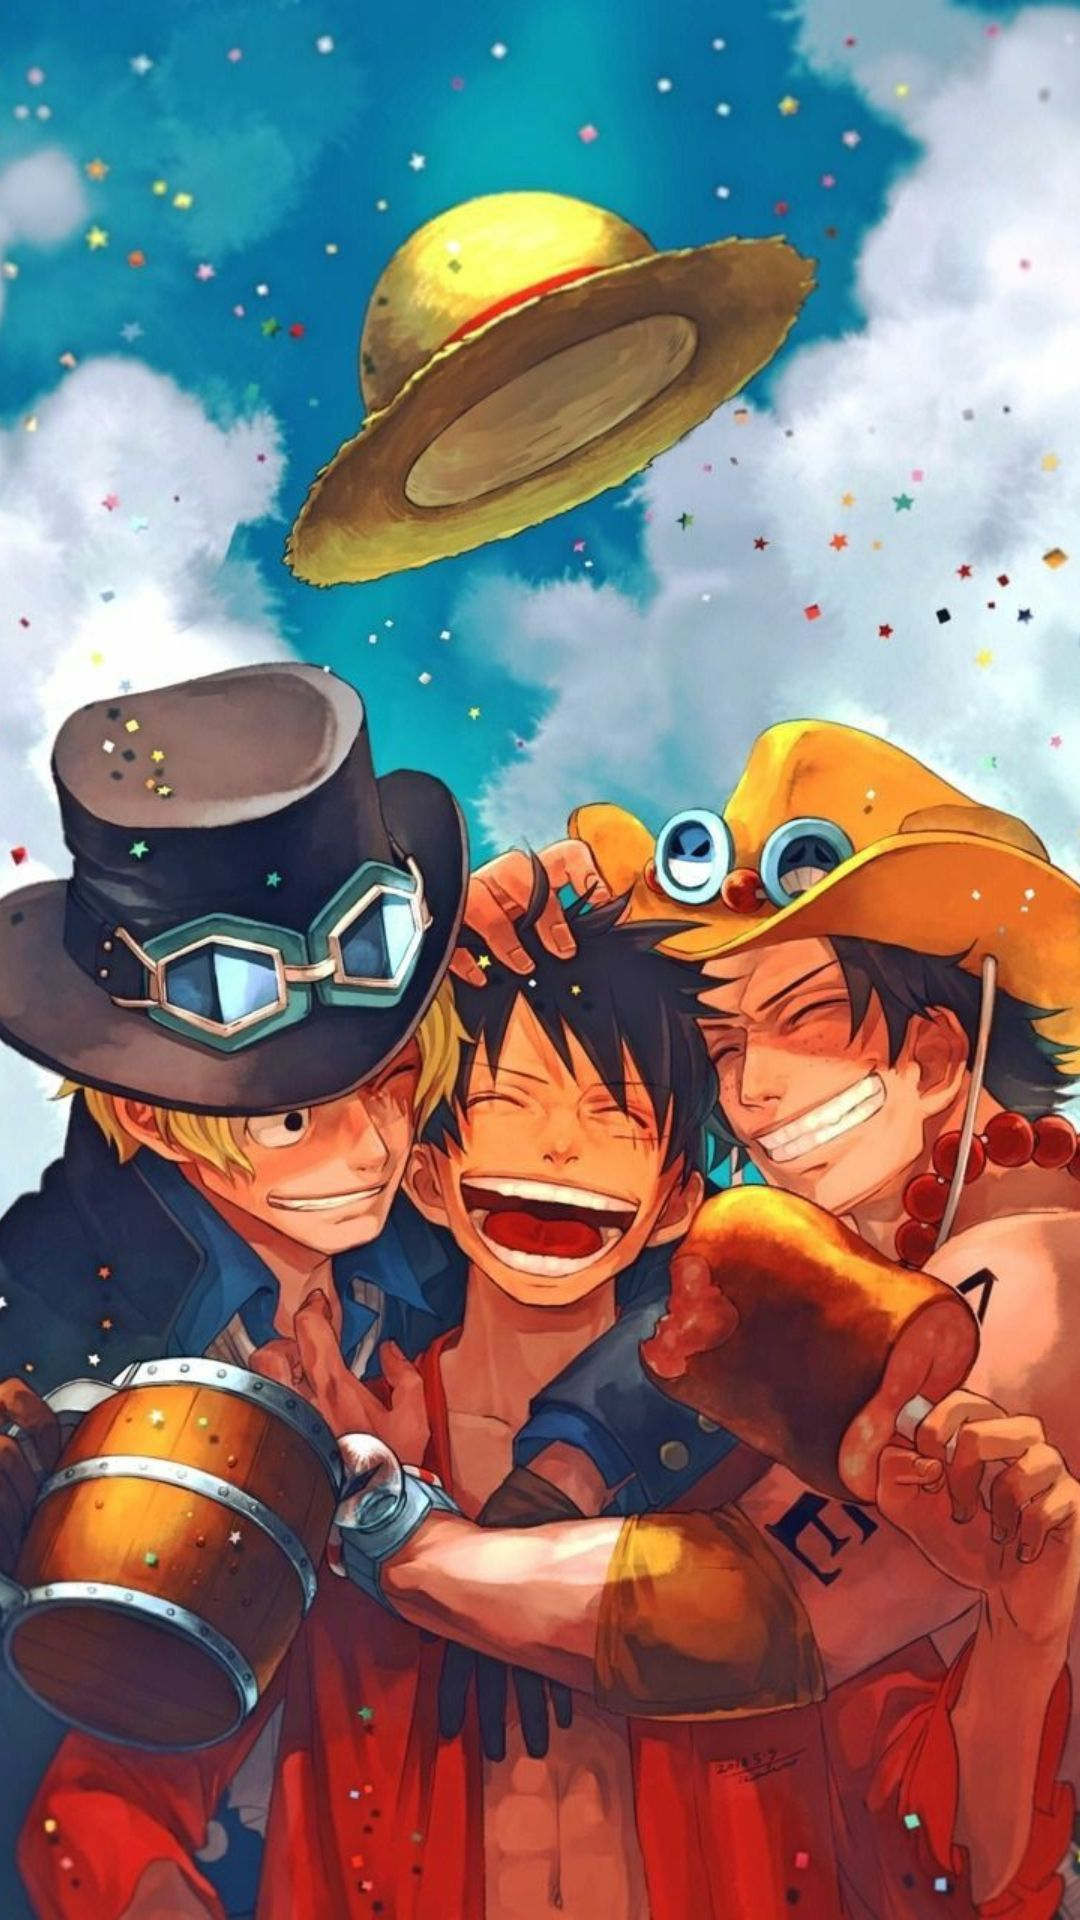 1080x1920 One Piece 4k Wallpapers Top Ultra 4k One Piece Backgrounds